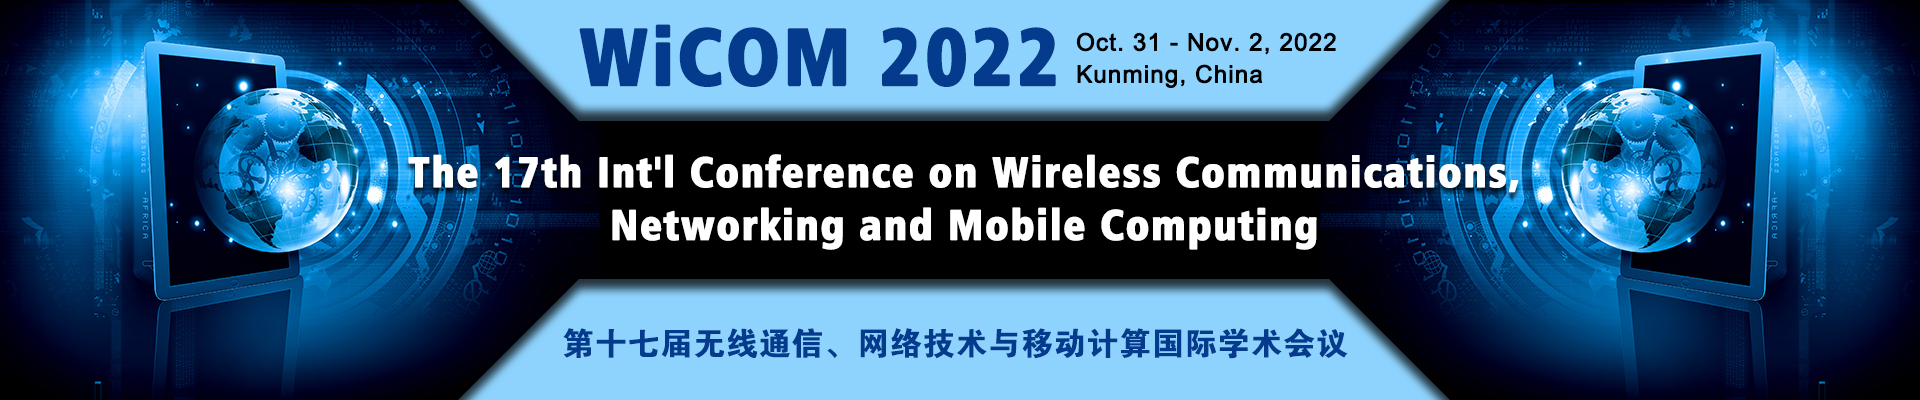 The 17th International Conference on Wireless Communications, Networking and Mobile   Computing (WiCOM 2022)